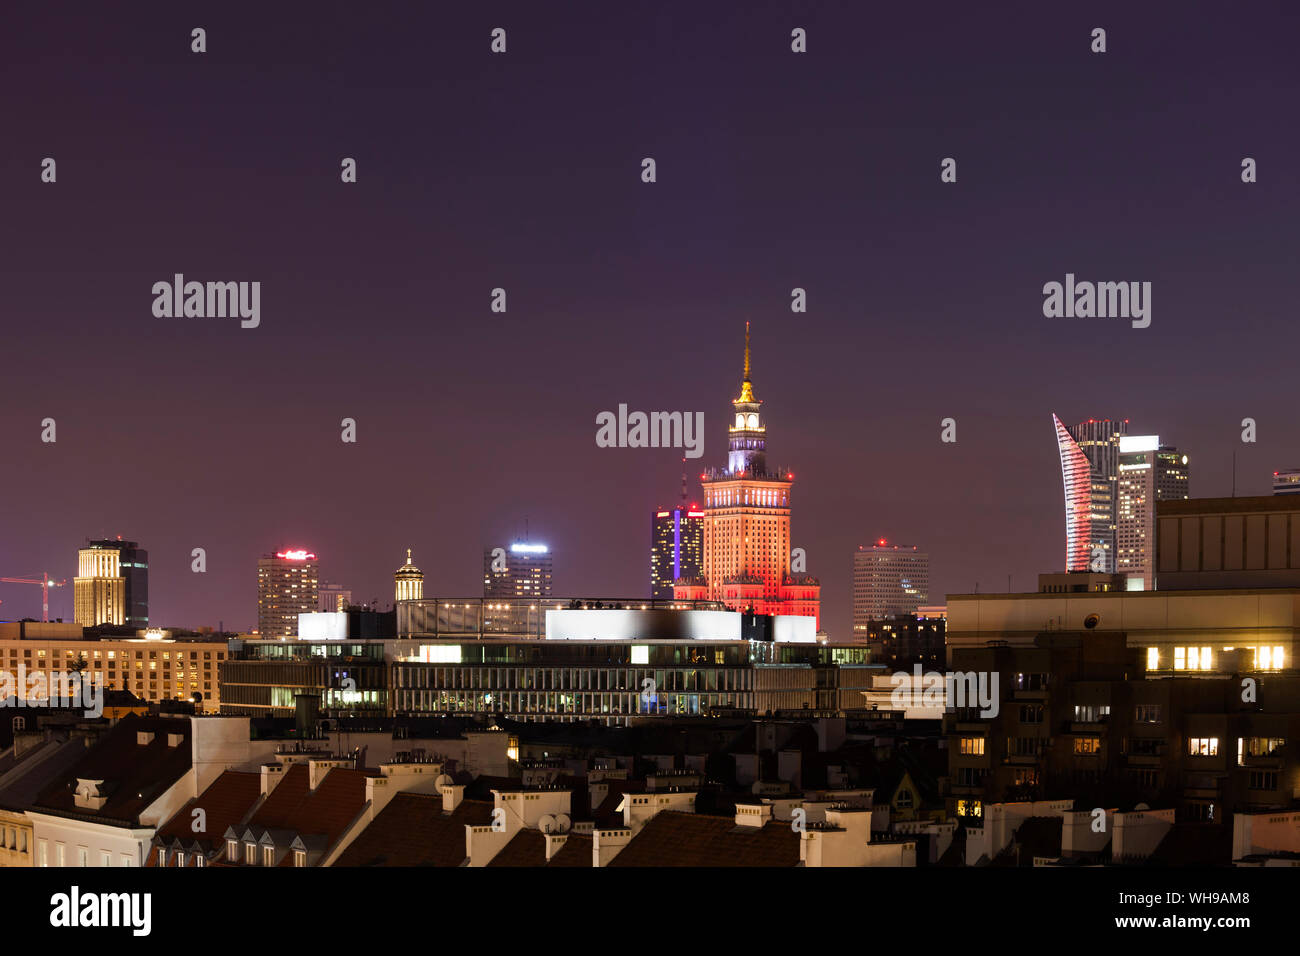 Cityscape at night, downtown district, Warsaw, Poland Stock Photo